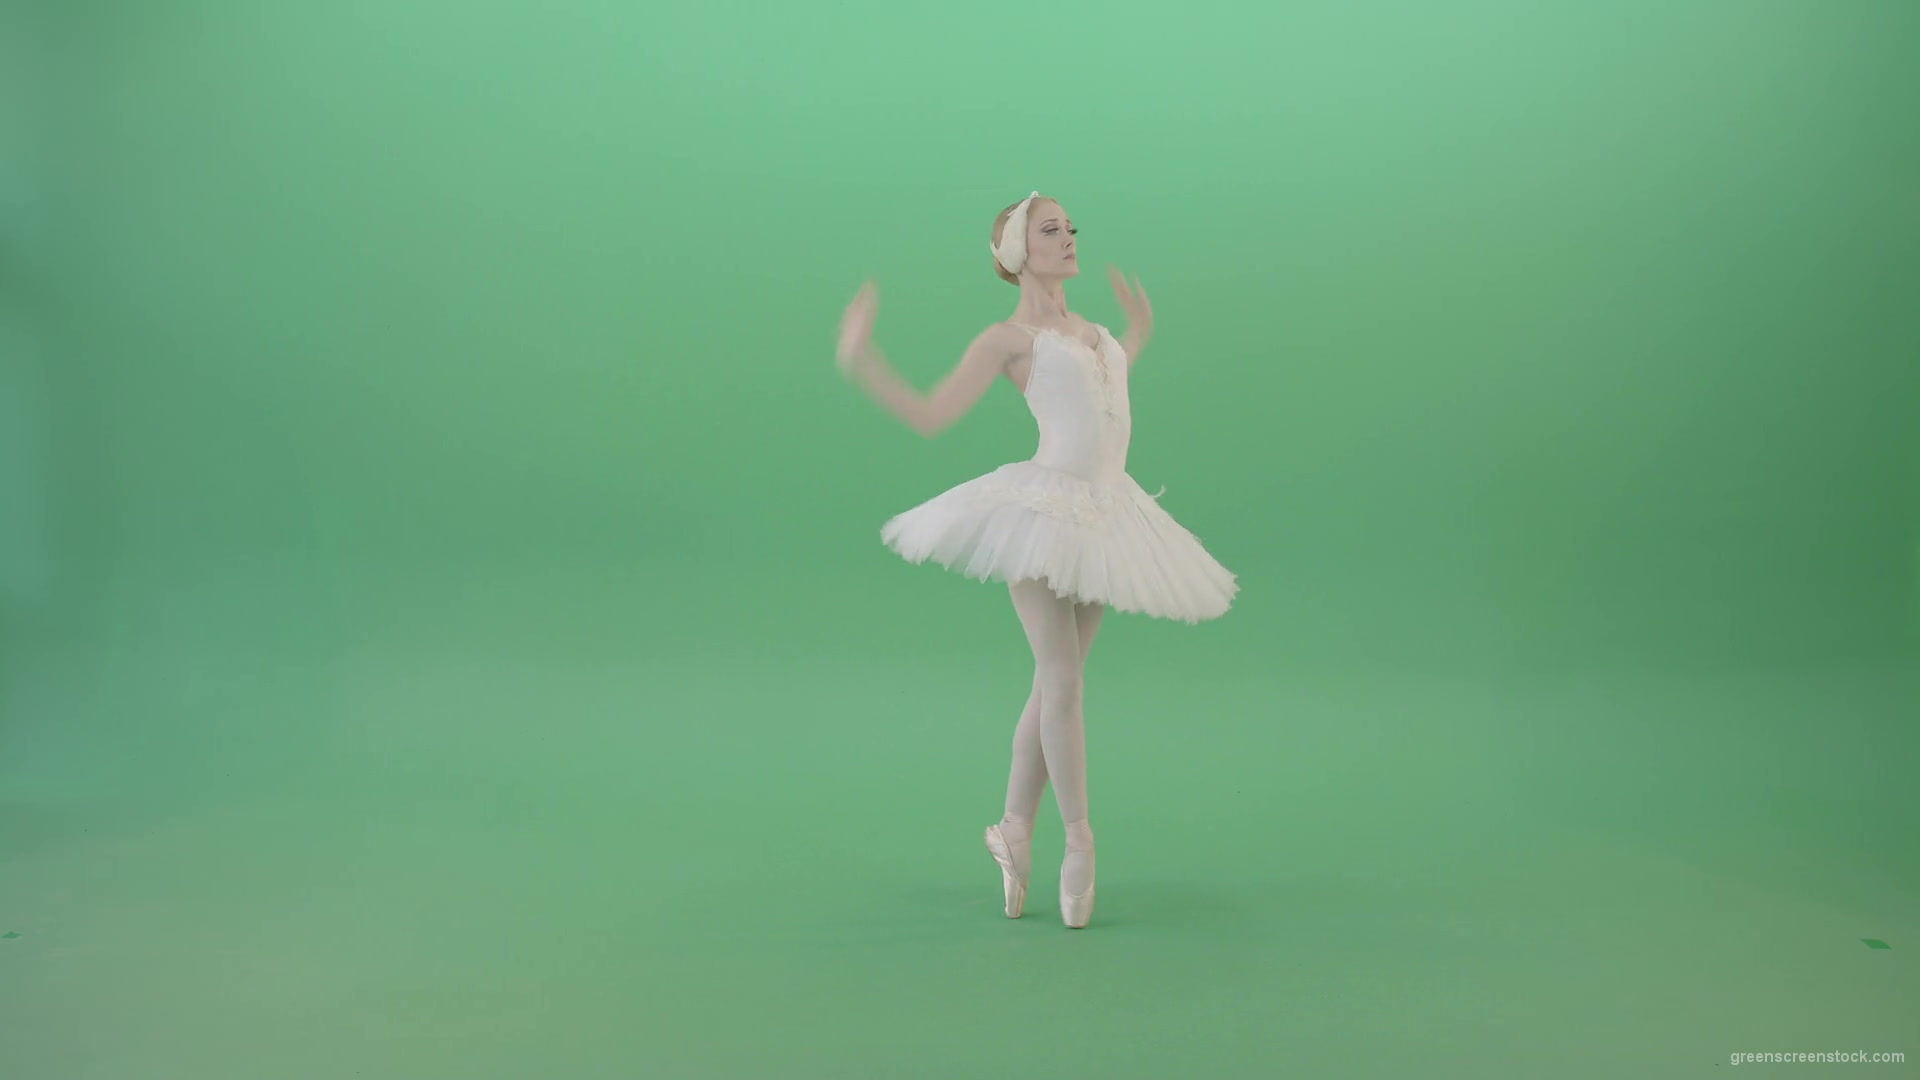 Fashion-snow-white-ballet-dancing-girl-showing-swan-lake-dance-isolated-on-Green-Screen-4K-Video-Footage-1920_006 Green Screen Stock